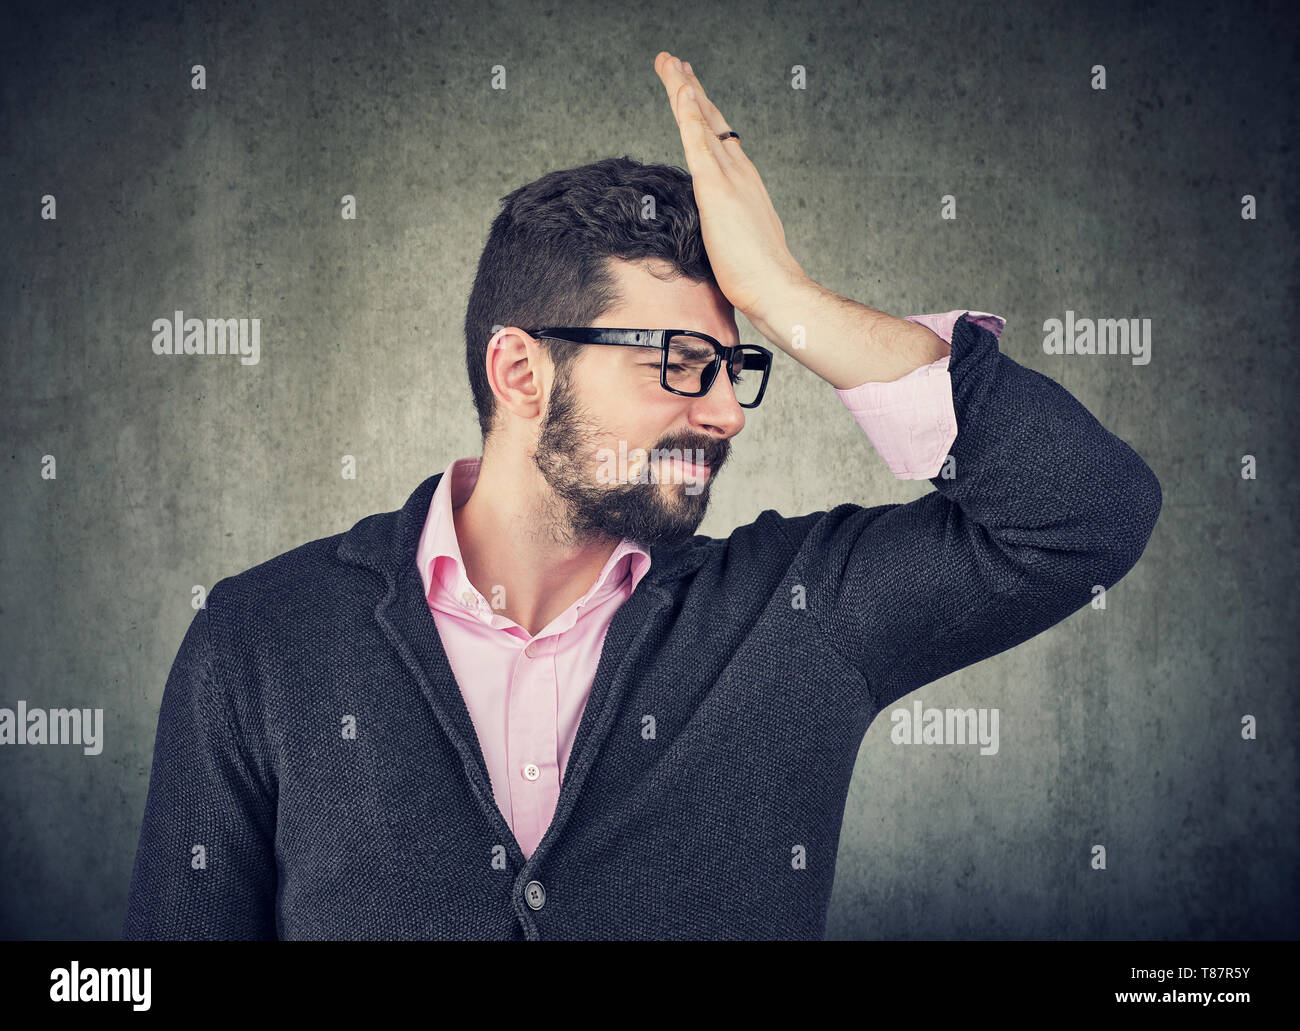 Regrets and wrong doing. Portrait of a stressed anxious young man, slapping hand on head realizing mistake. Stock Photo